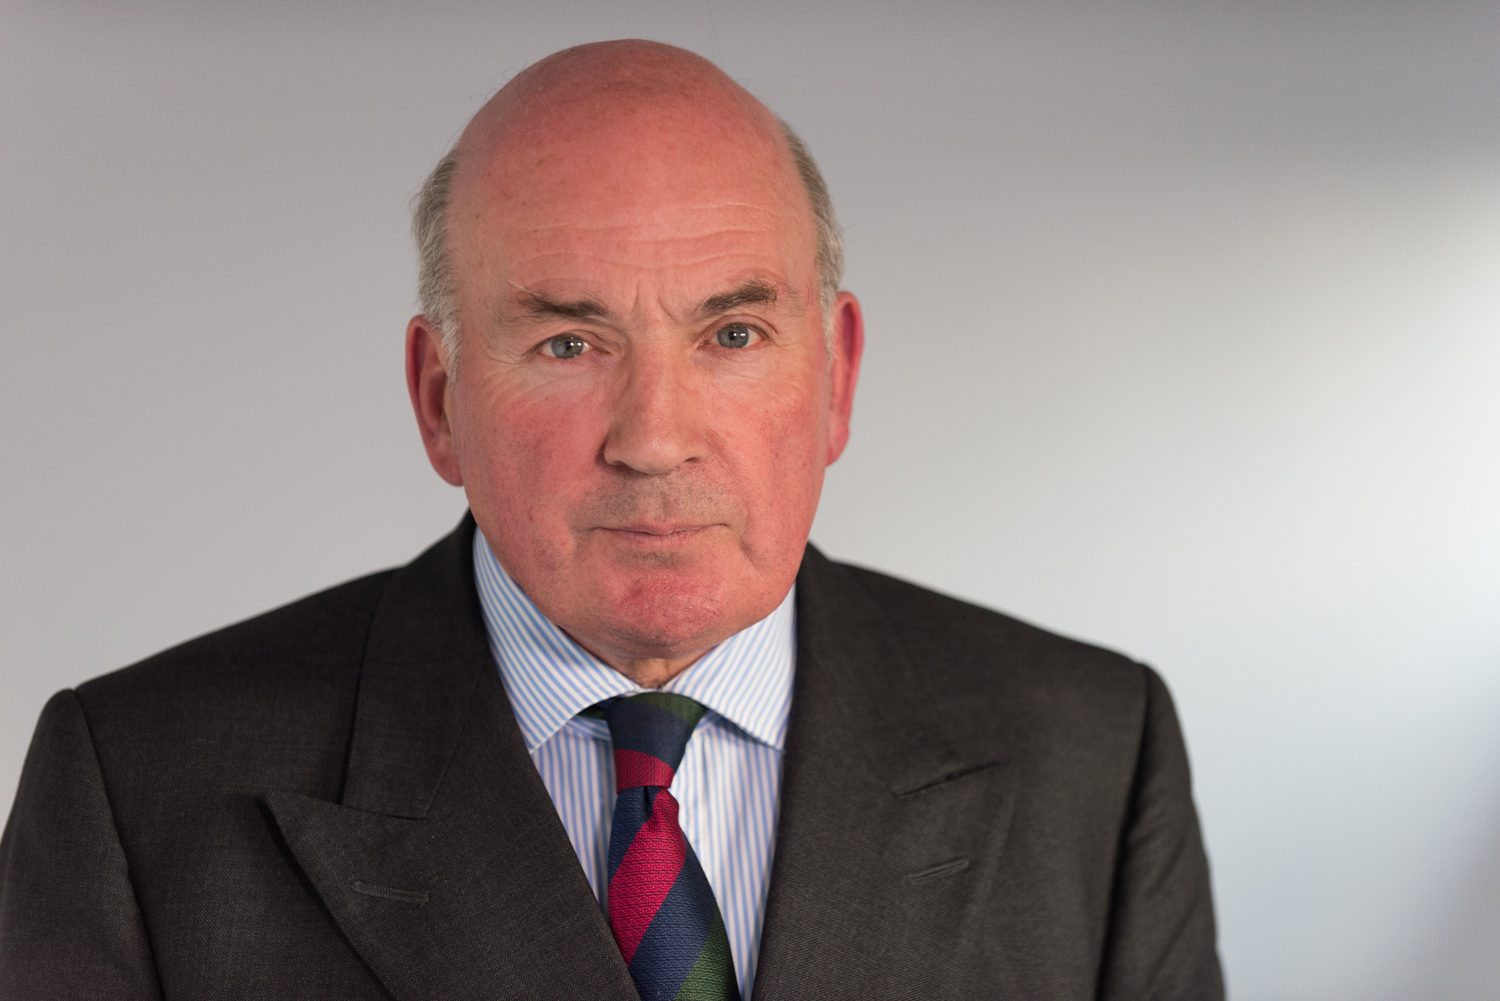 40 years a soldier – Lord Dannatt to speak about his life at Norfolk event